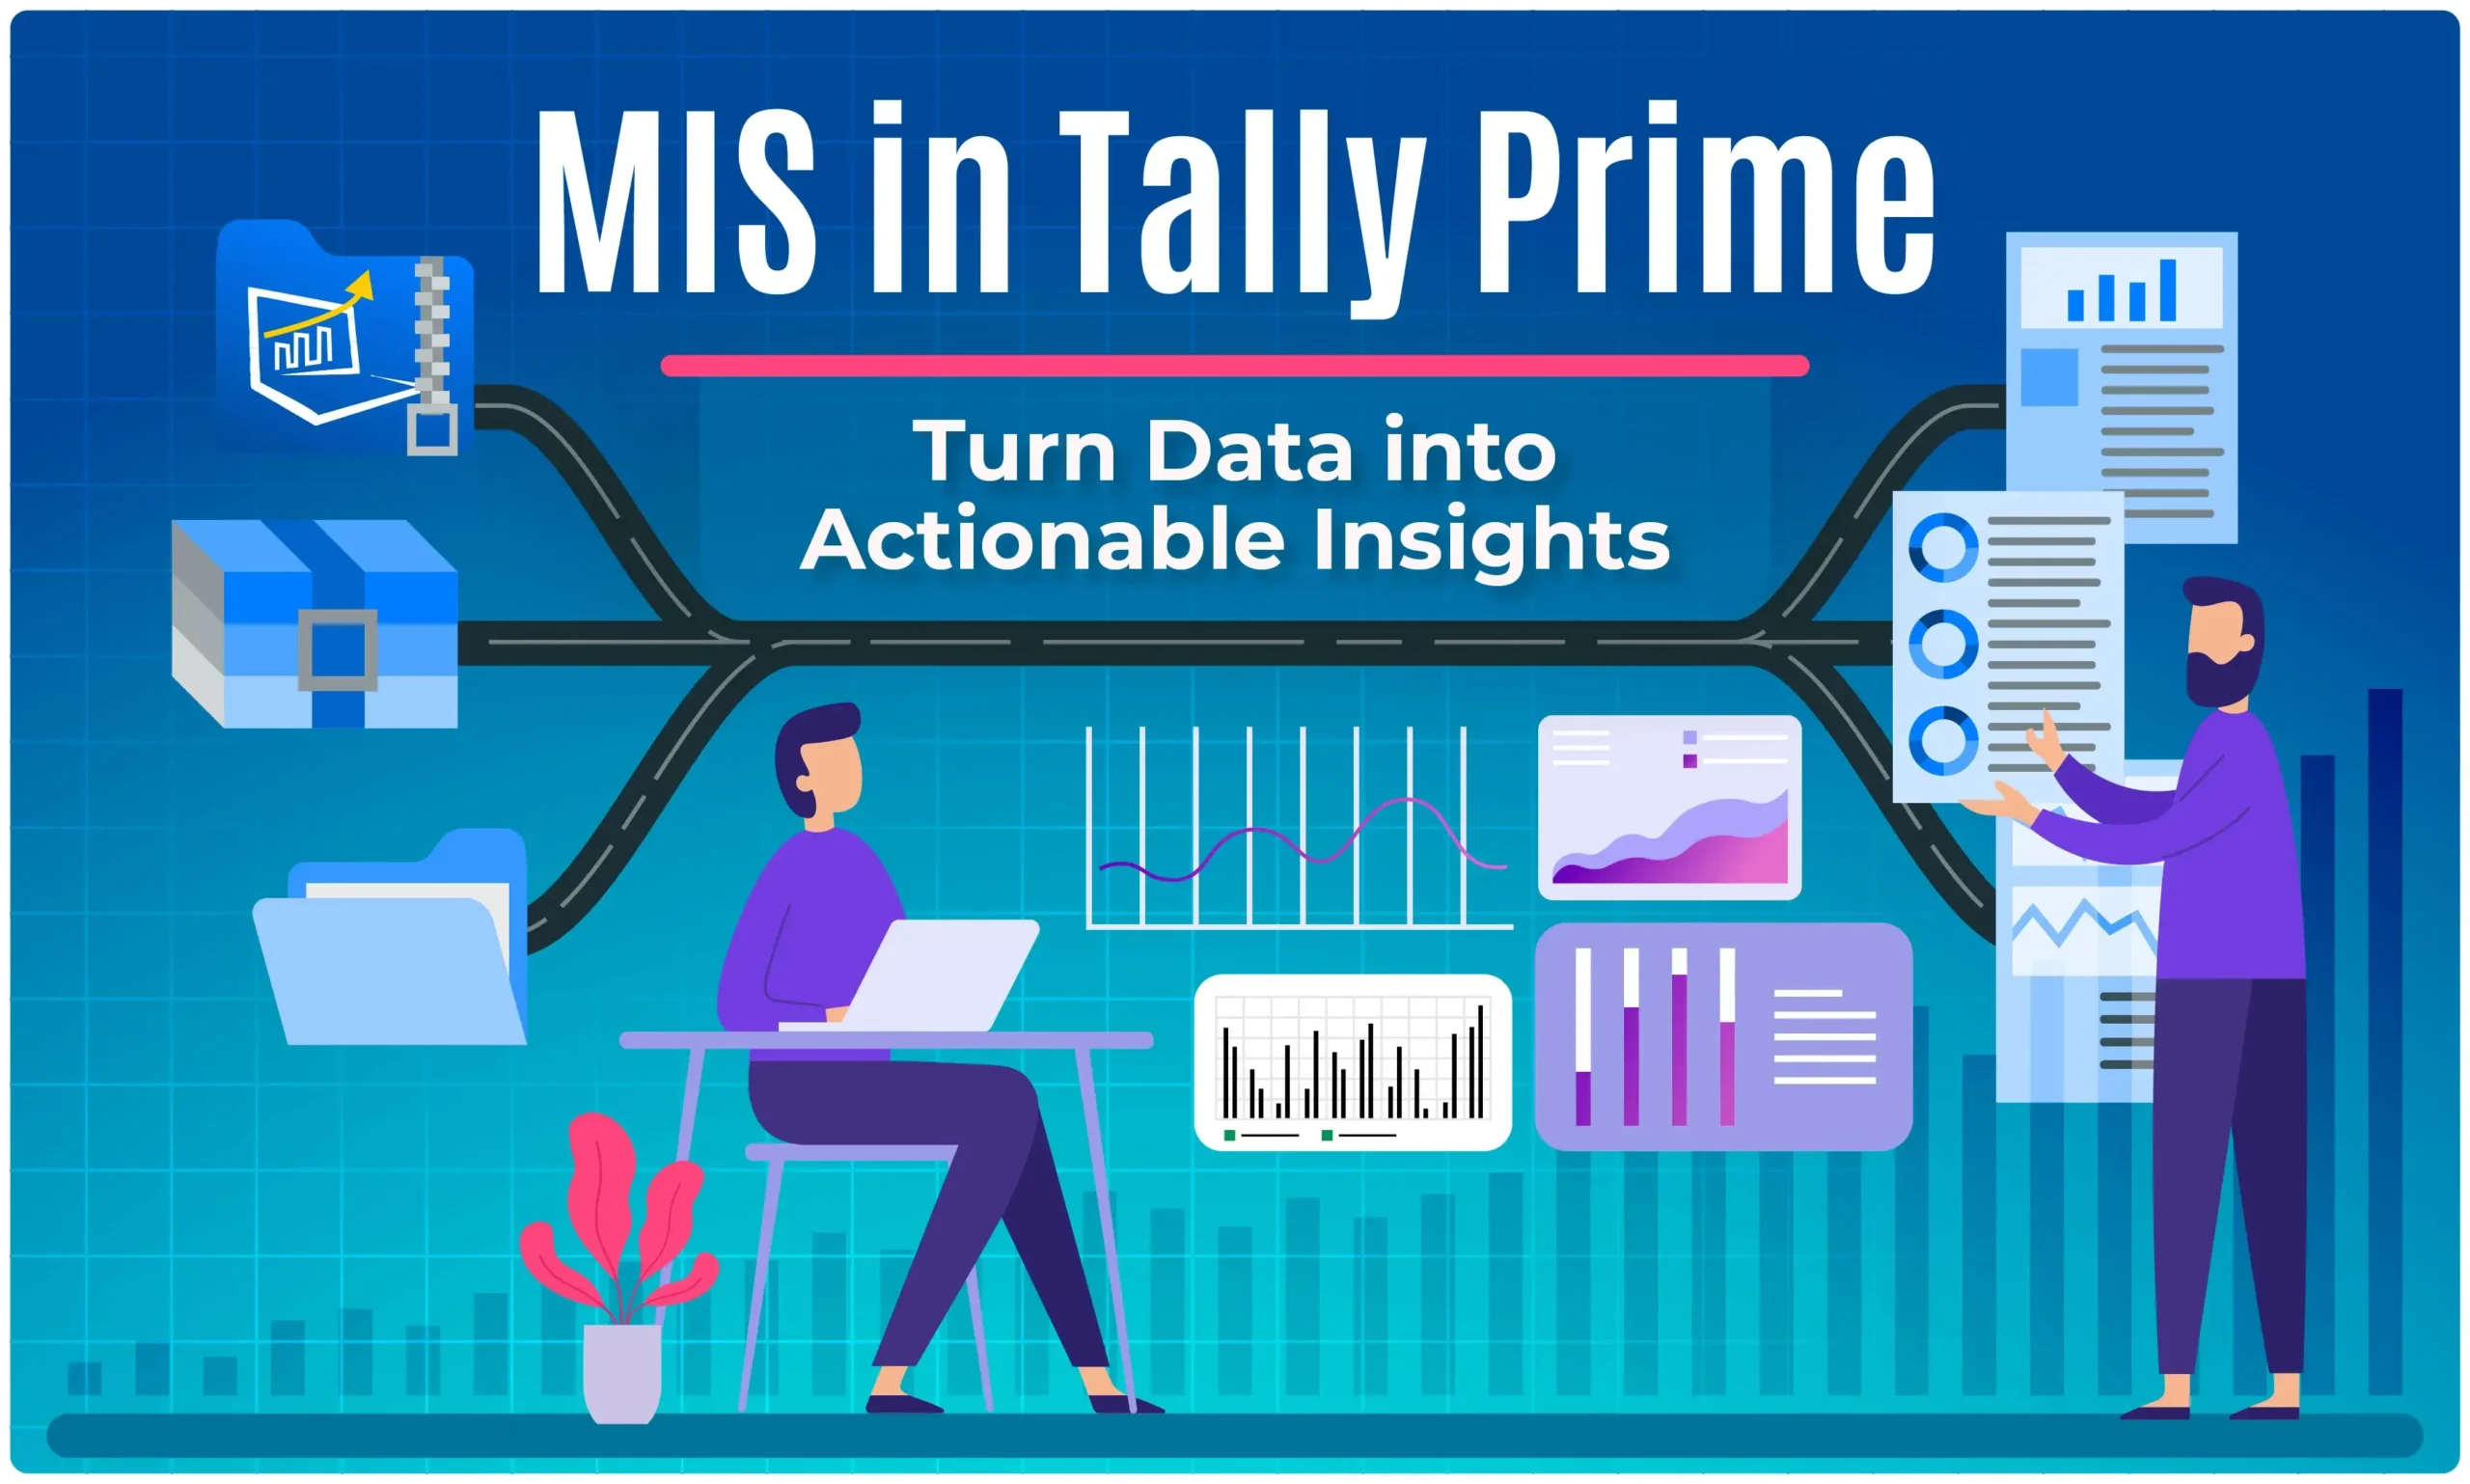 MIS in Tally Prime: Turn Data into Actionable Insights